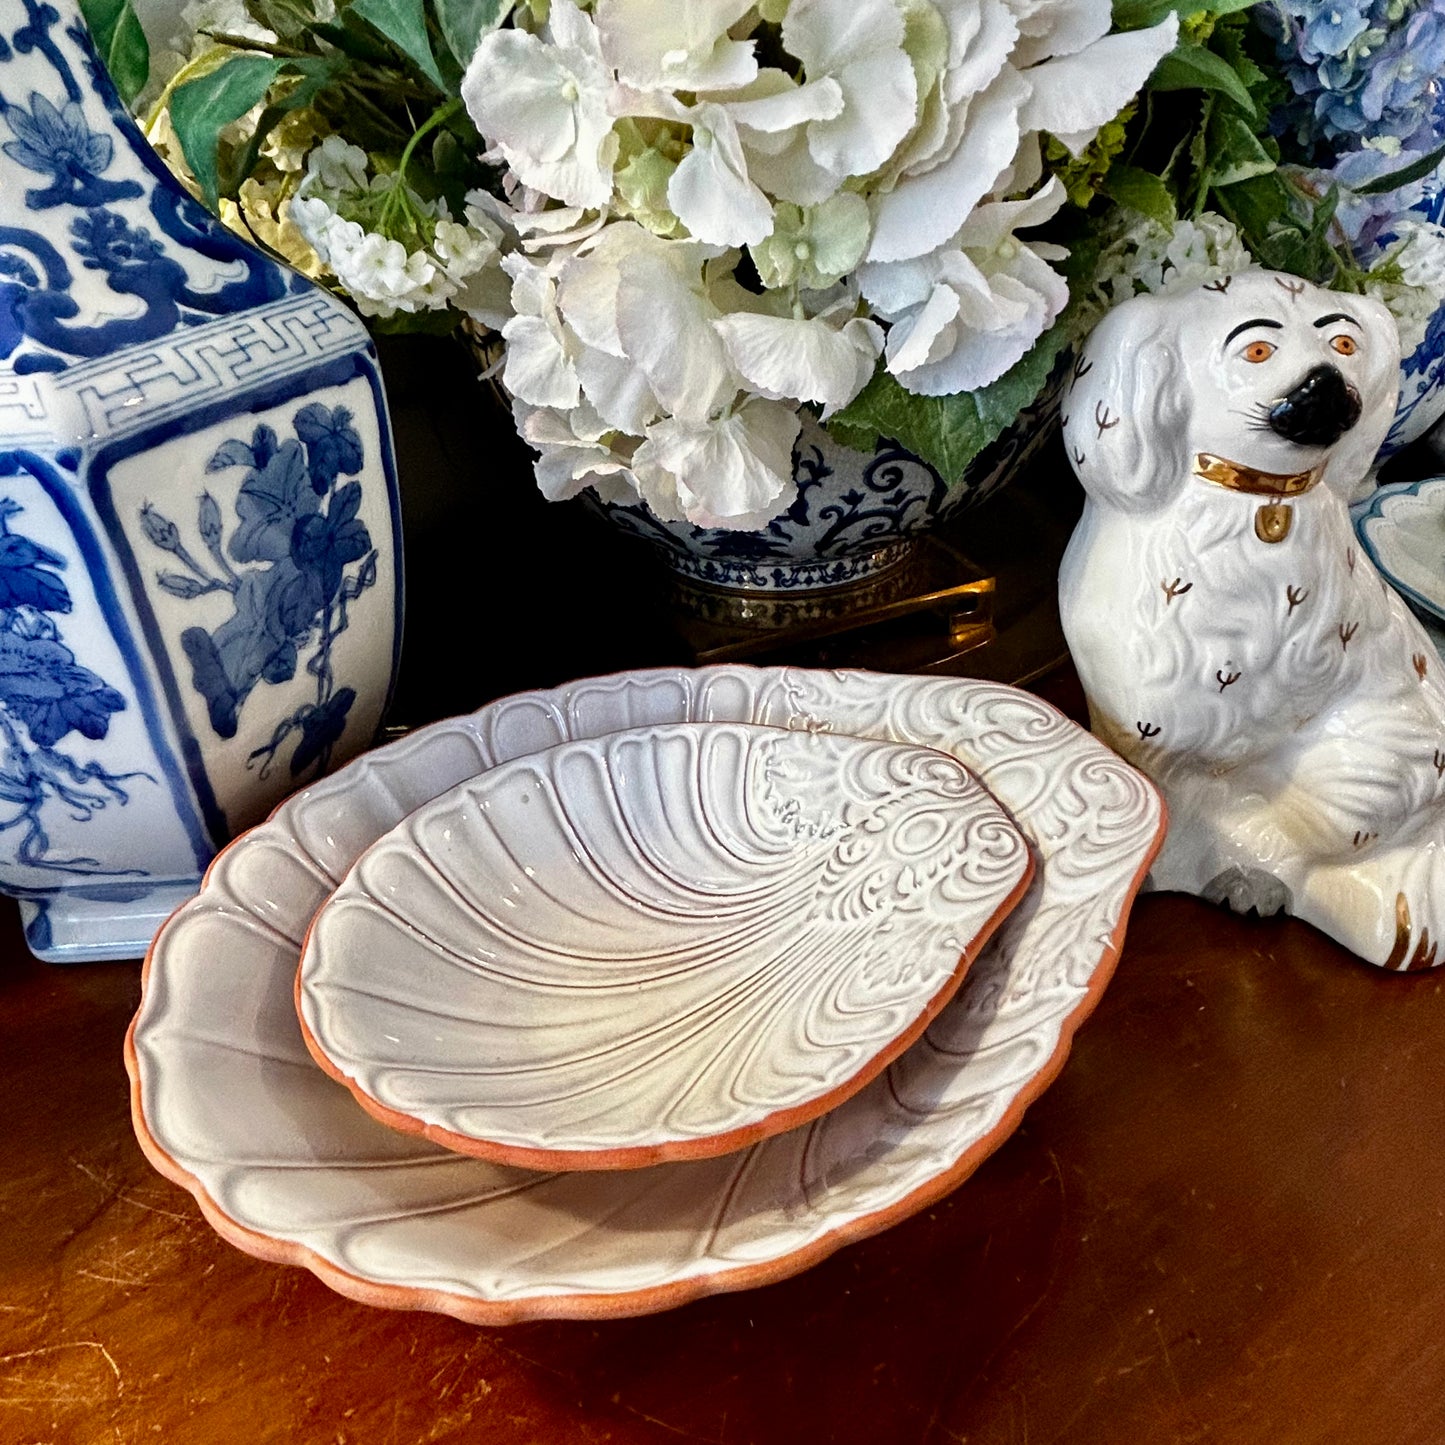 Set of two designer terra cotta clam shell bowls by Loneoak & Co.